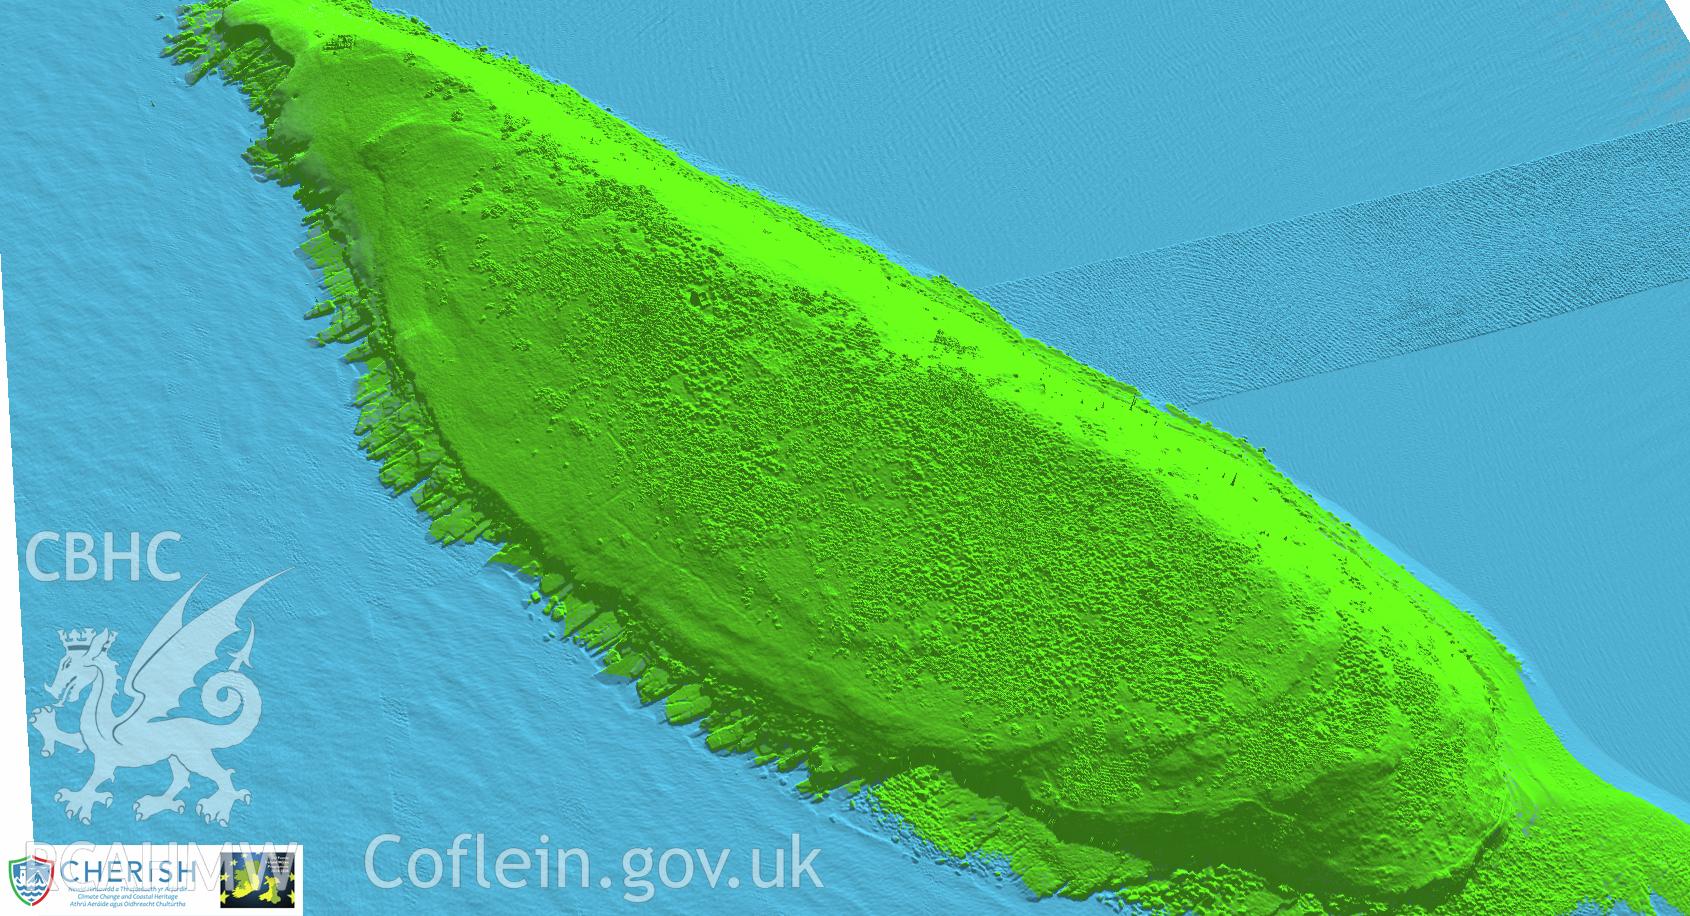 Ynys Seiriol (Puffin Island). Airborne laser scanning (LiDAR) commissioned by the CHERISH Project 2017-2021, flown by Bluesky International LTD at low tide on 24th February 2017.